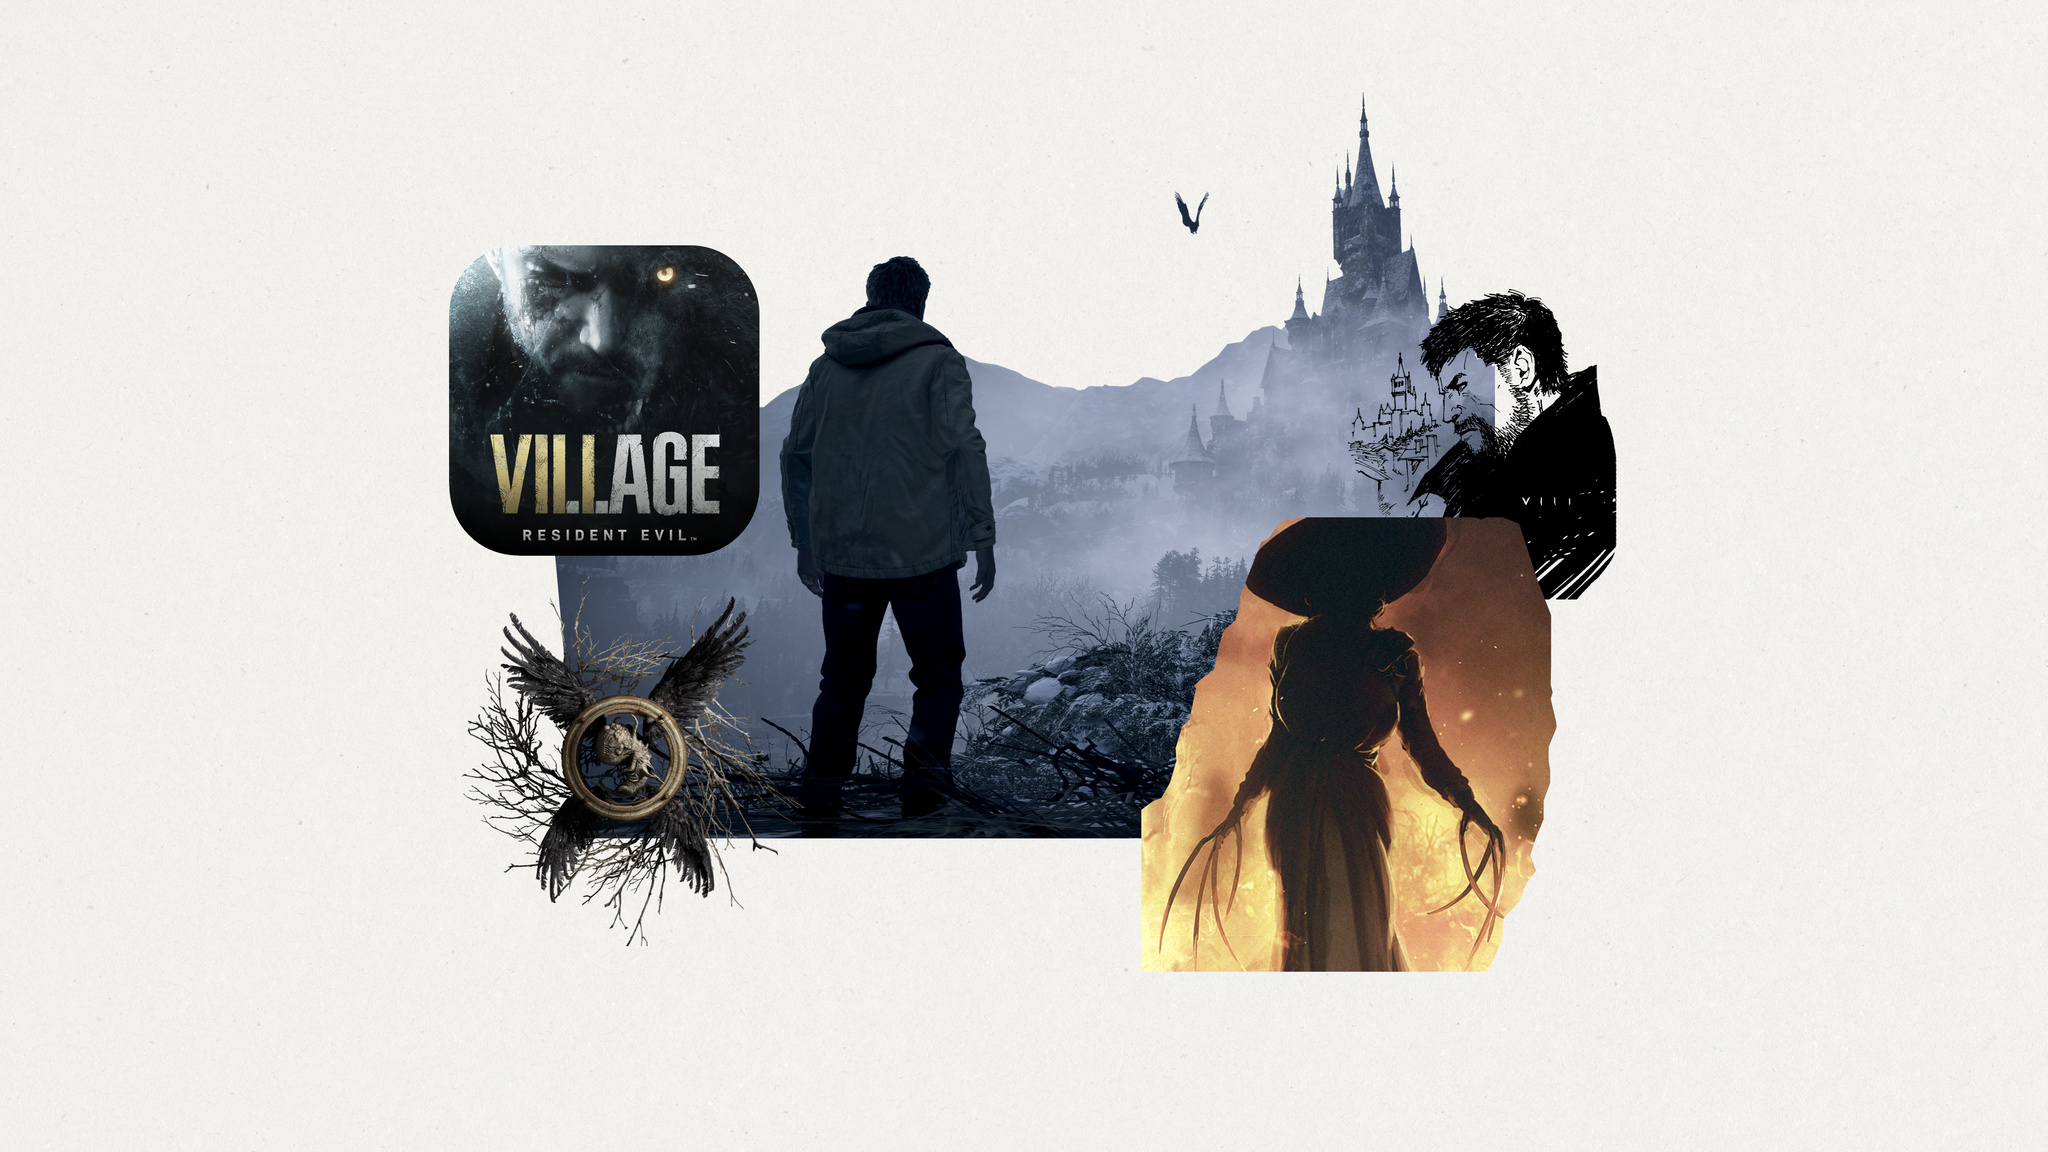 A collage of art elements from the Apple Design Award-winning game Resident Evil Village.